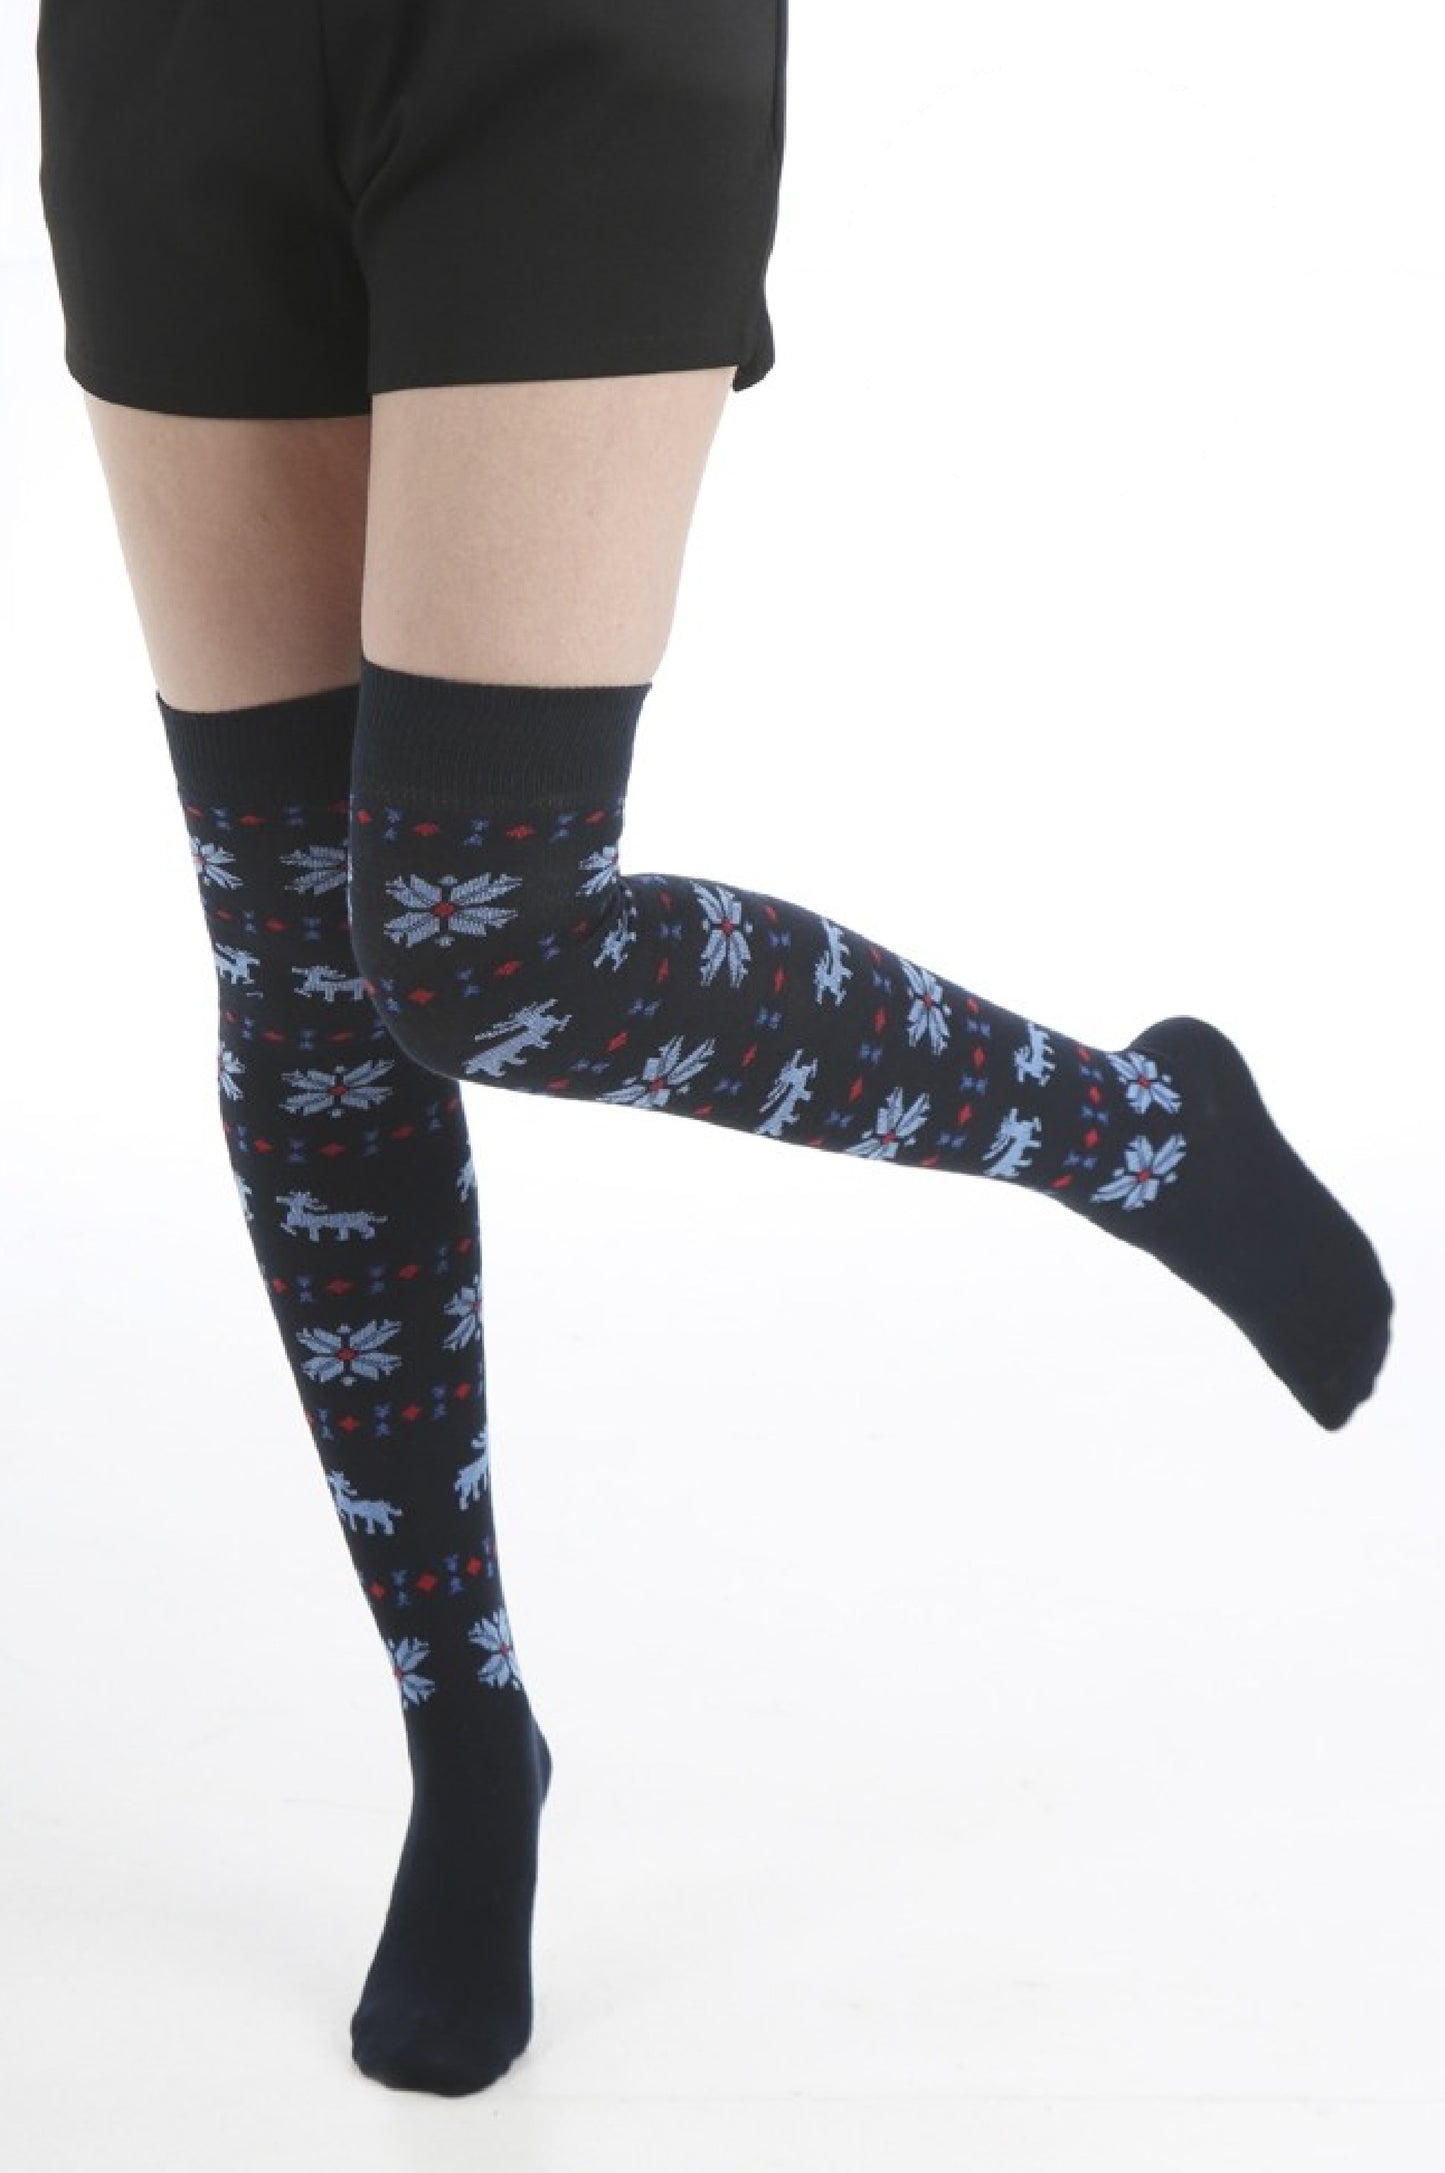 Pamela Mann Xmas Reindeer Over-Knee Socks - Christmas over the knee cotton socks with a fairisle style pattern of reindeers, snowflakes and diamond shapes. Available in navy, blue and red